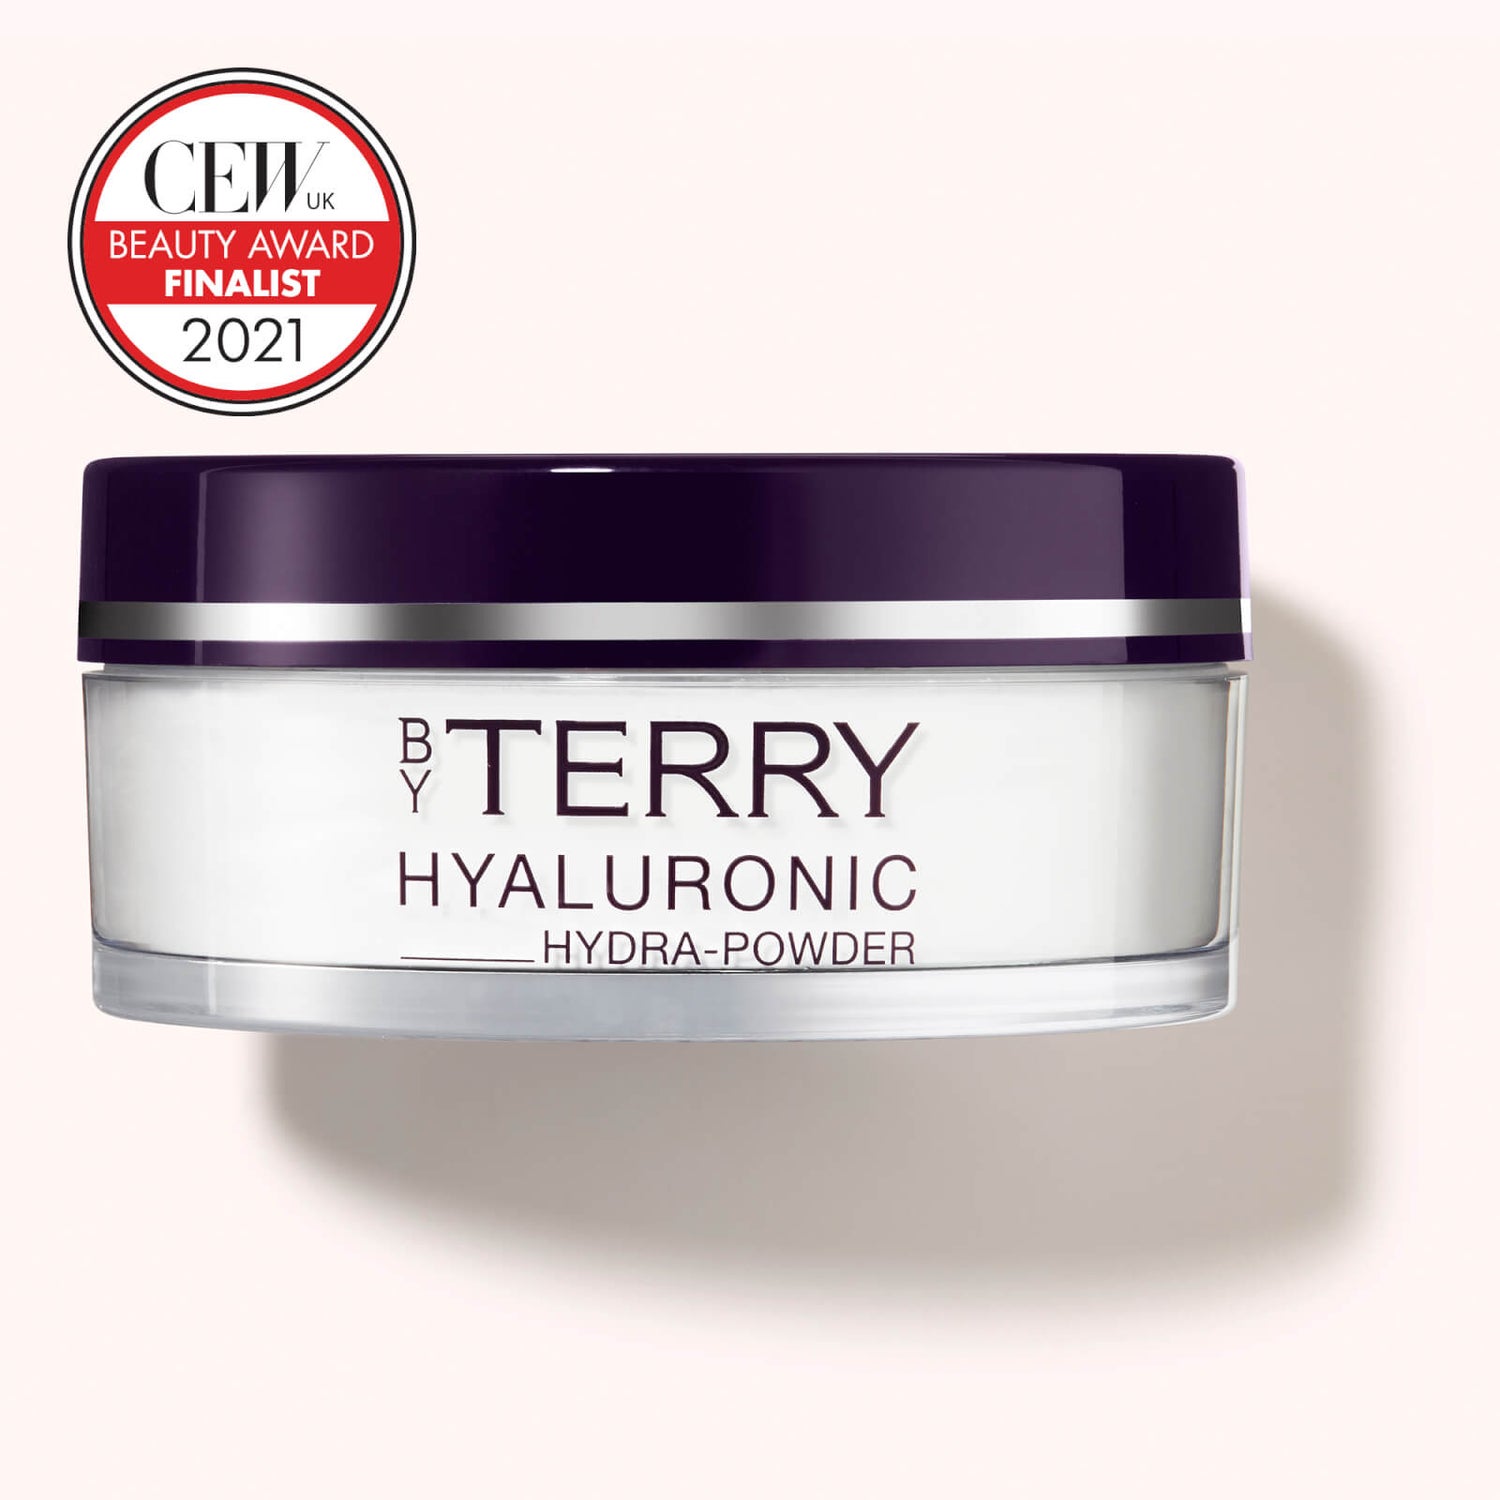 By Terry Hyaluronic Hydra-Powder 10 g